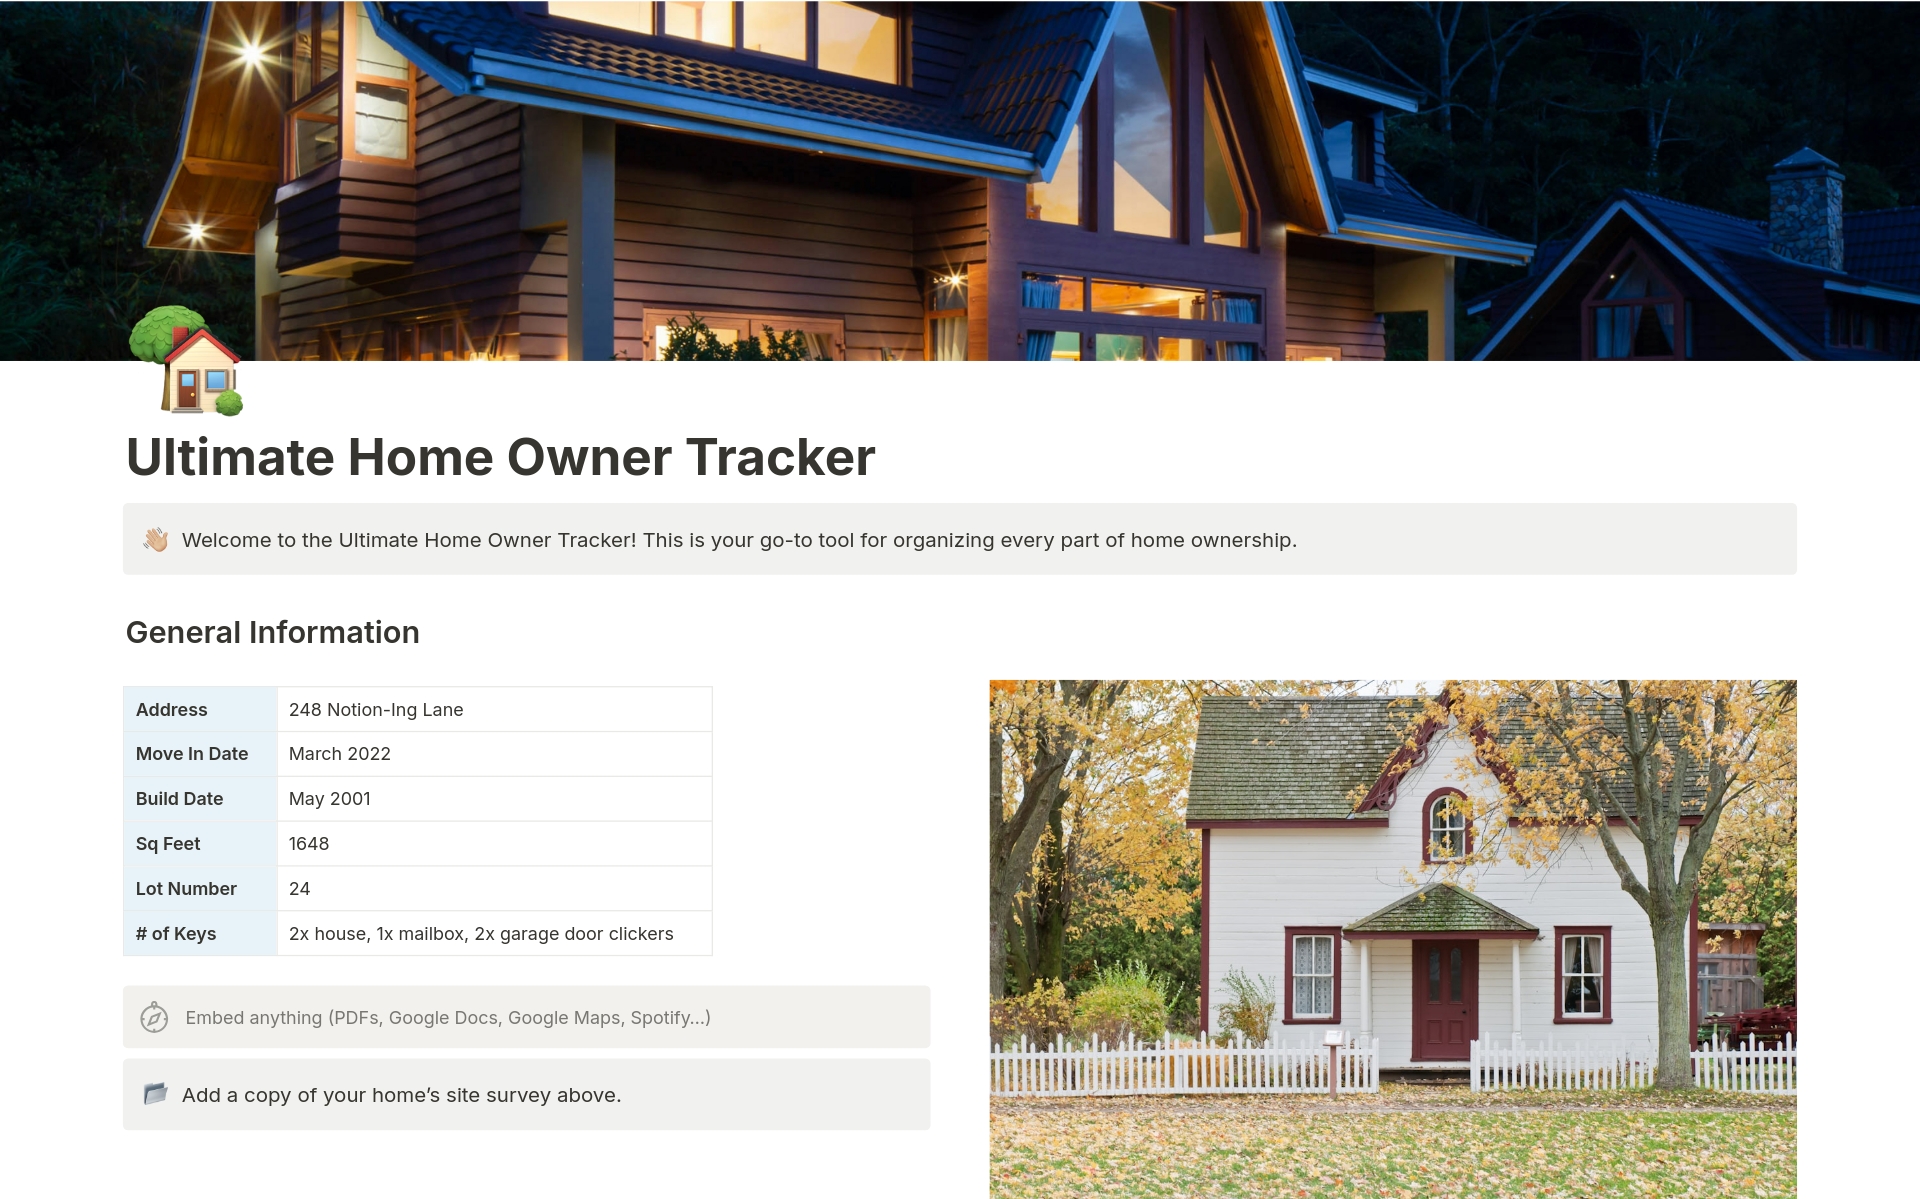 Our Ultimate Home Tracker is your new go-to tool for organizing every part of home ownership! Inside you’ll find the perfect system for managing all of your homes information, including an easy way to track service dates, appliance purchases, maintenance and more! 
